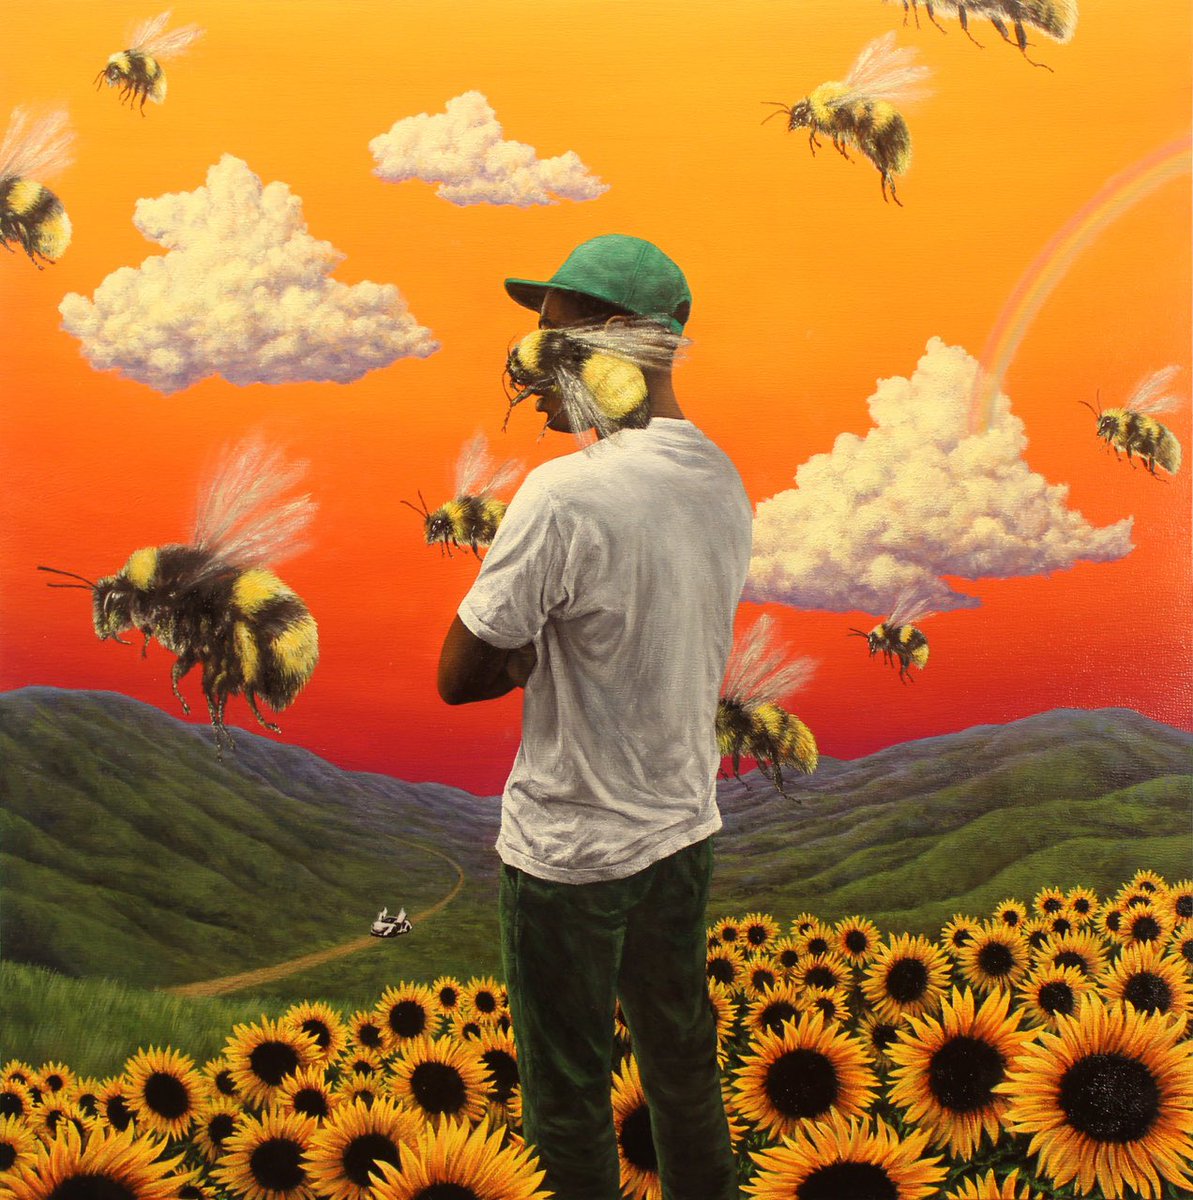 #SOTD: Tyler, the Creator – ‘Where This Flower Blooms’